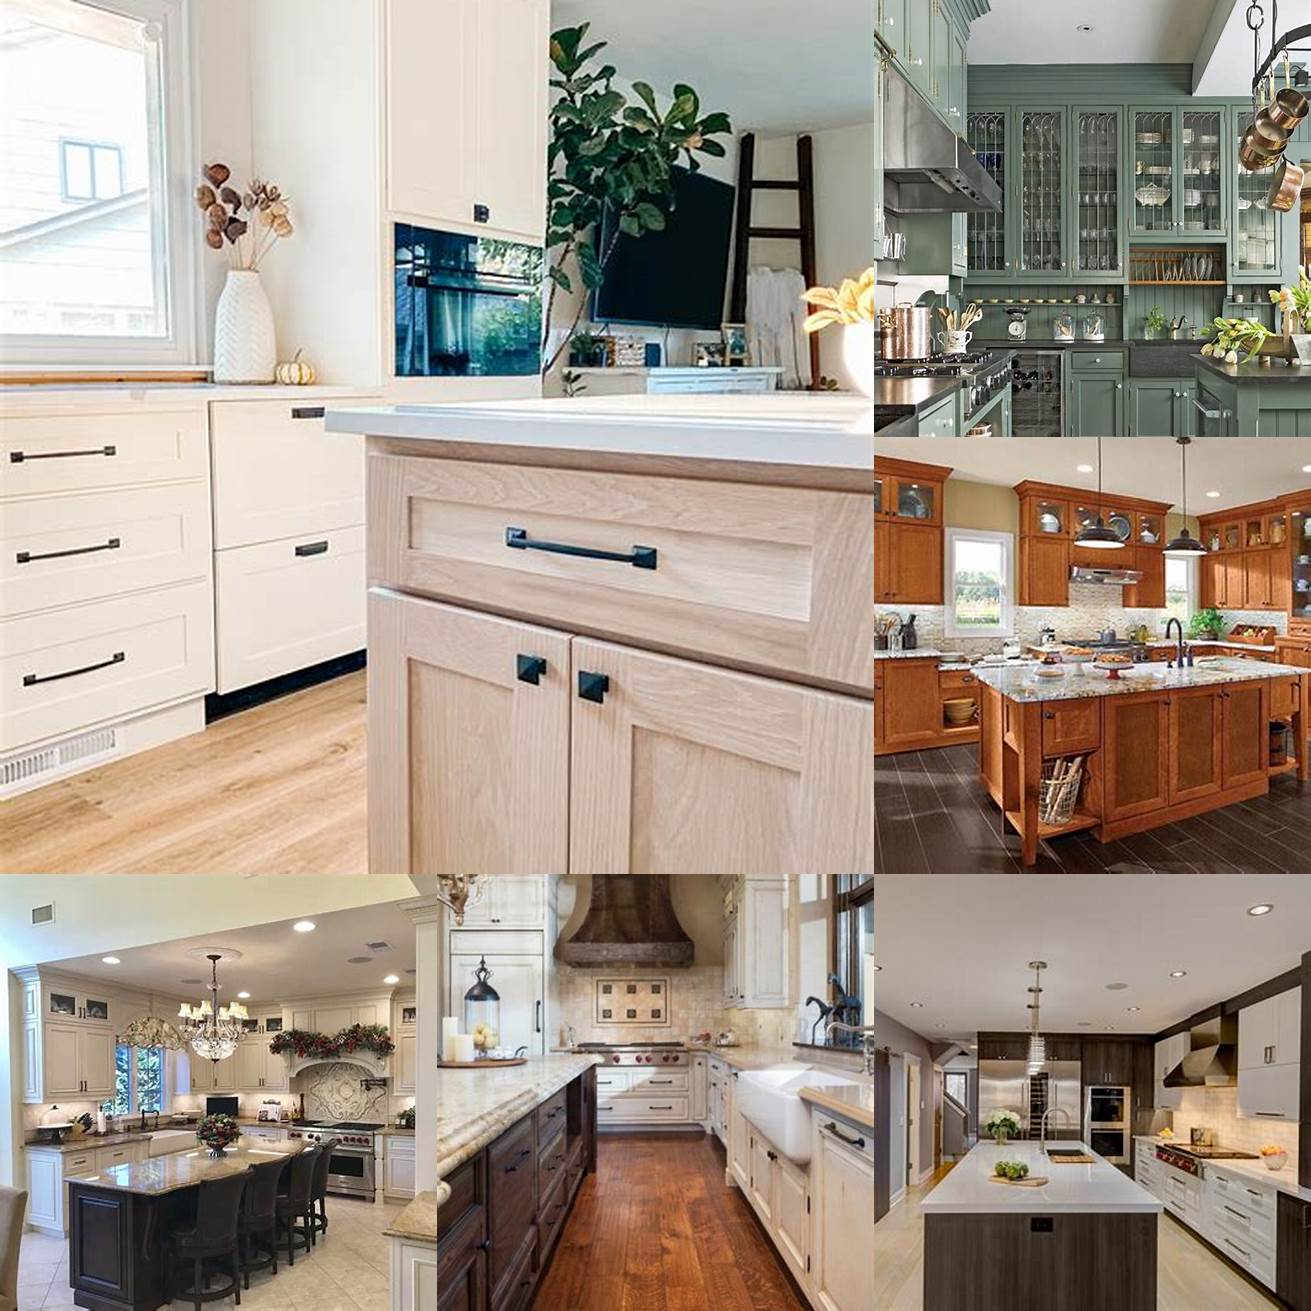 Mix and match with closed cabinets